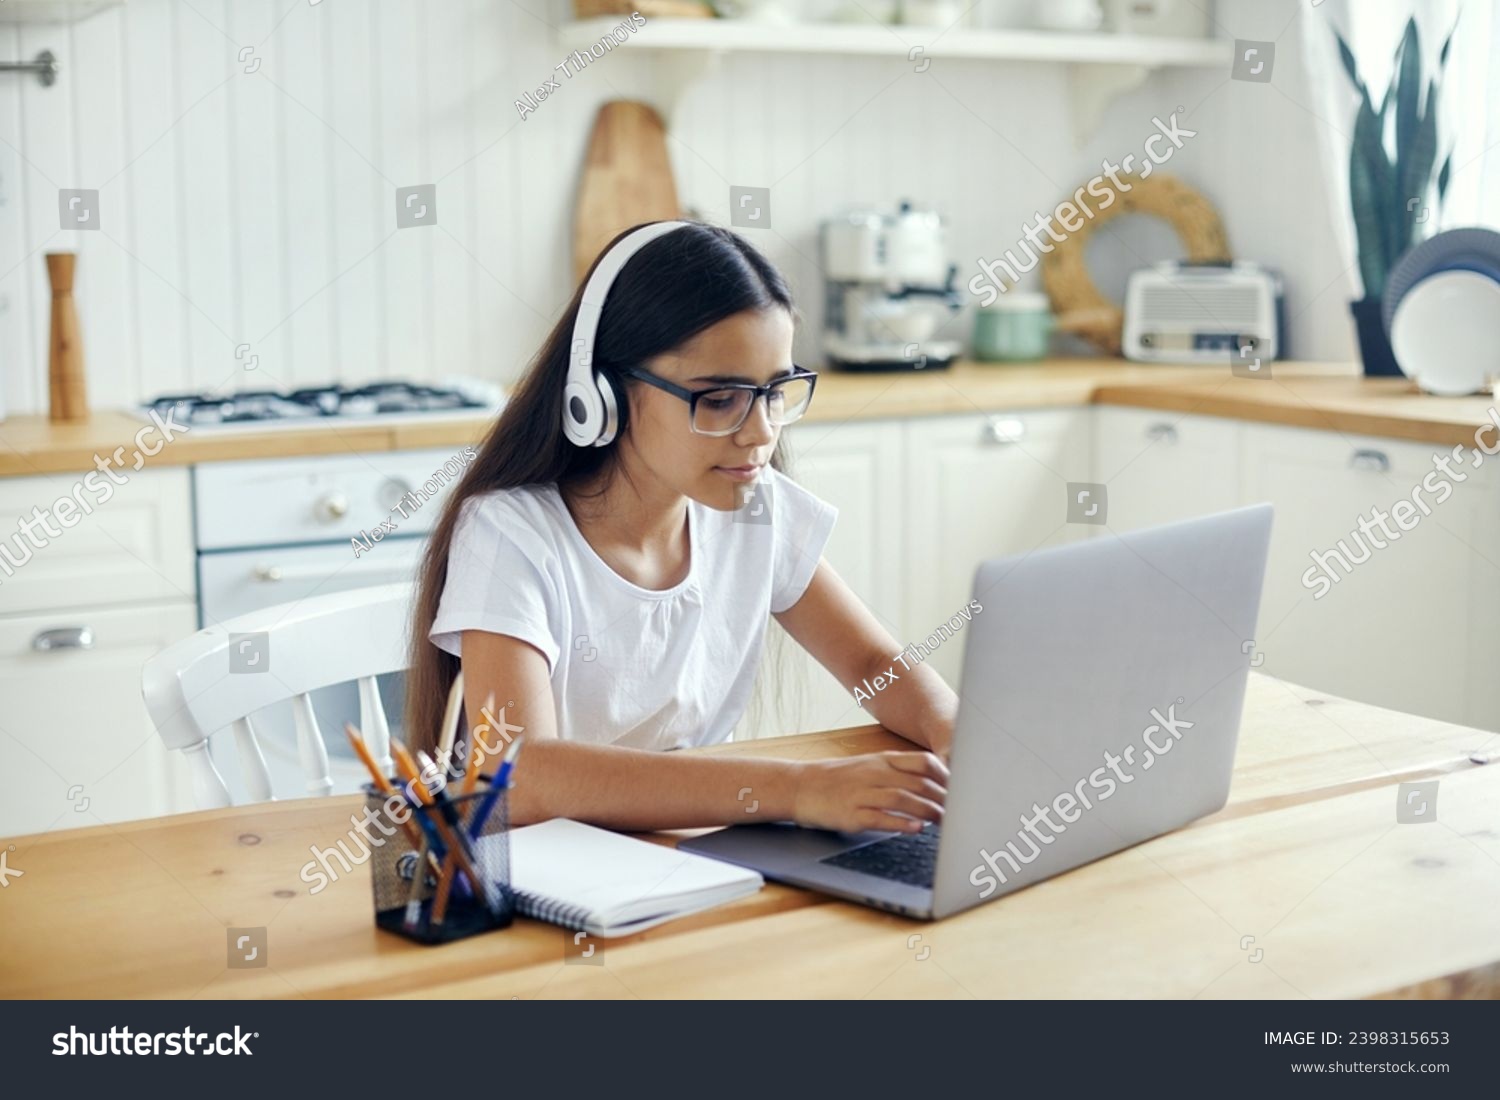 Pre-teen 12s girl in headphones and eyeglasses sit at table e-learns, listen online course, audio lesson, get new knowledge, skills using internet and modern tech. Development, education, eye-sight #2398315653